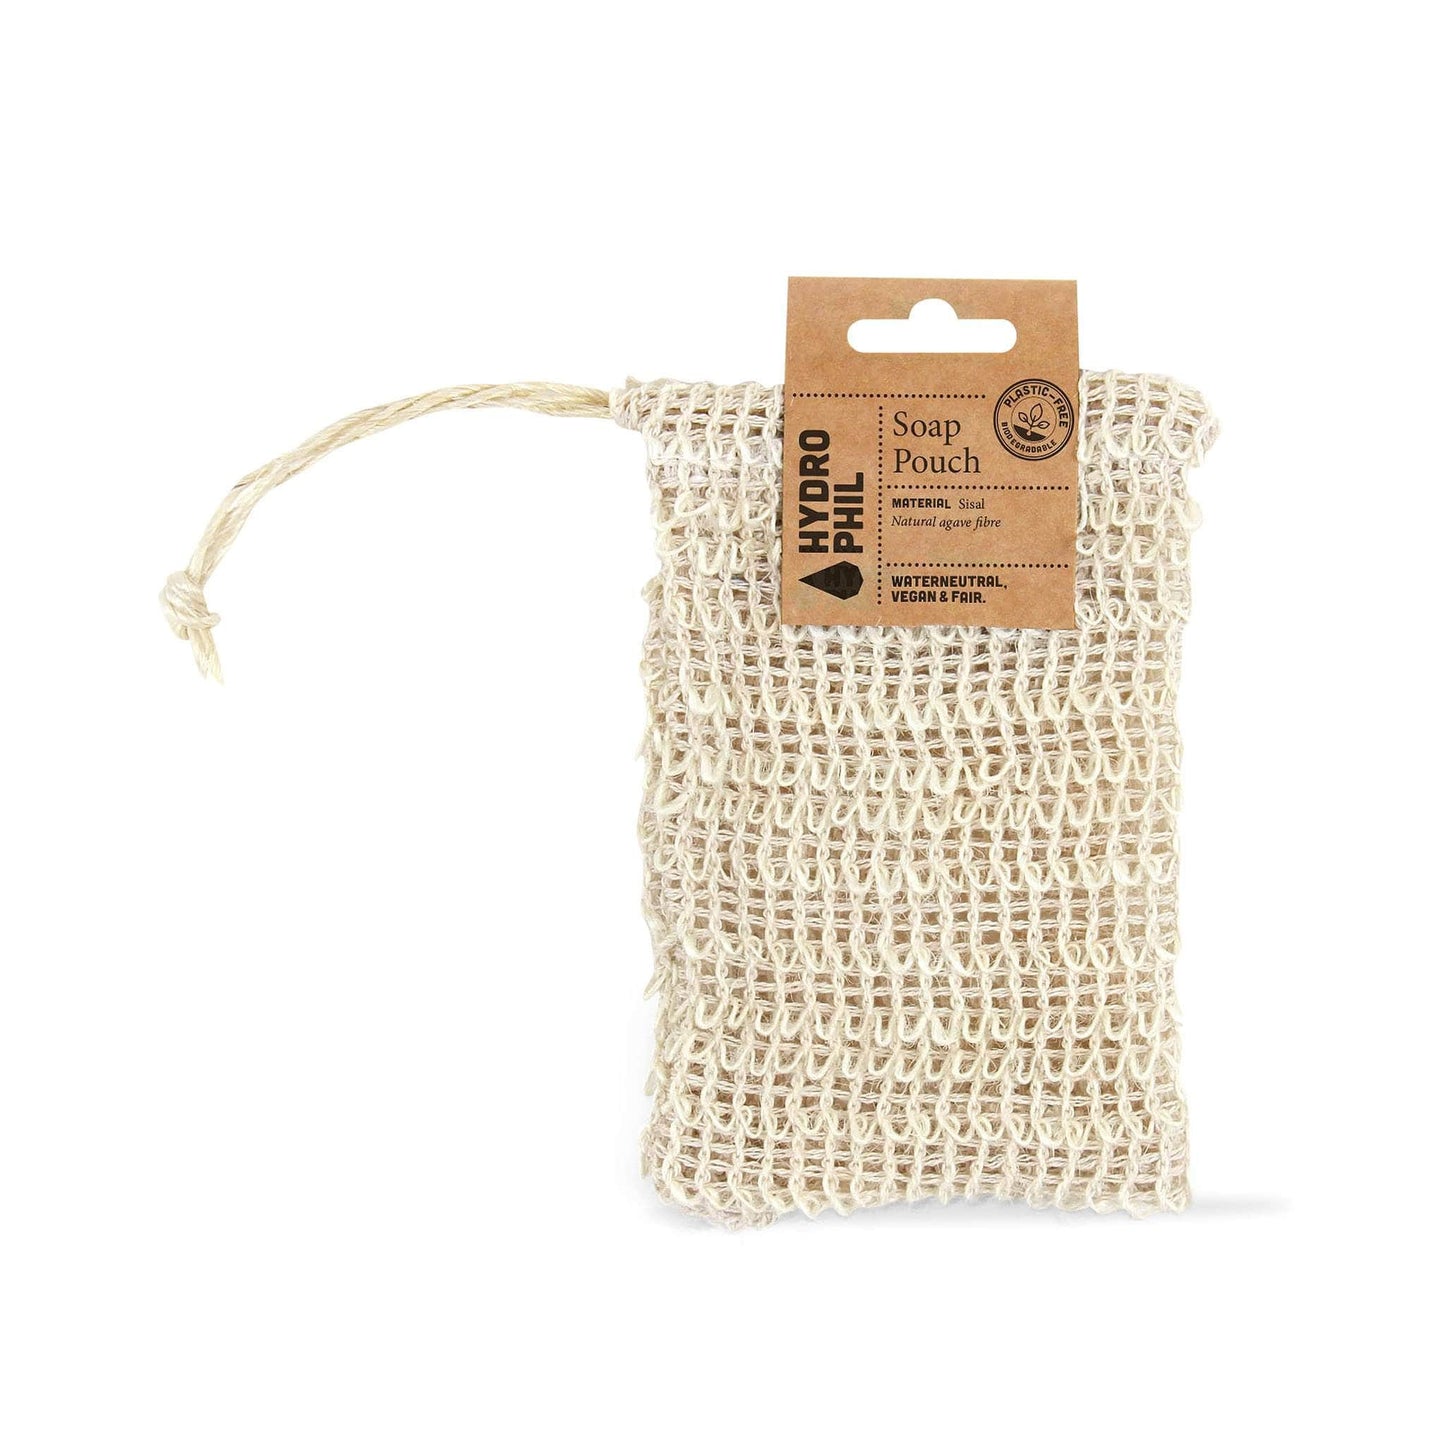 Hydrophil Soap Dishes Hydrophil - Exfoliating Sisal Soap Pouch